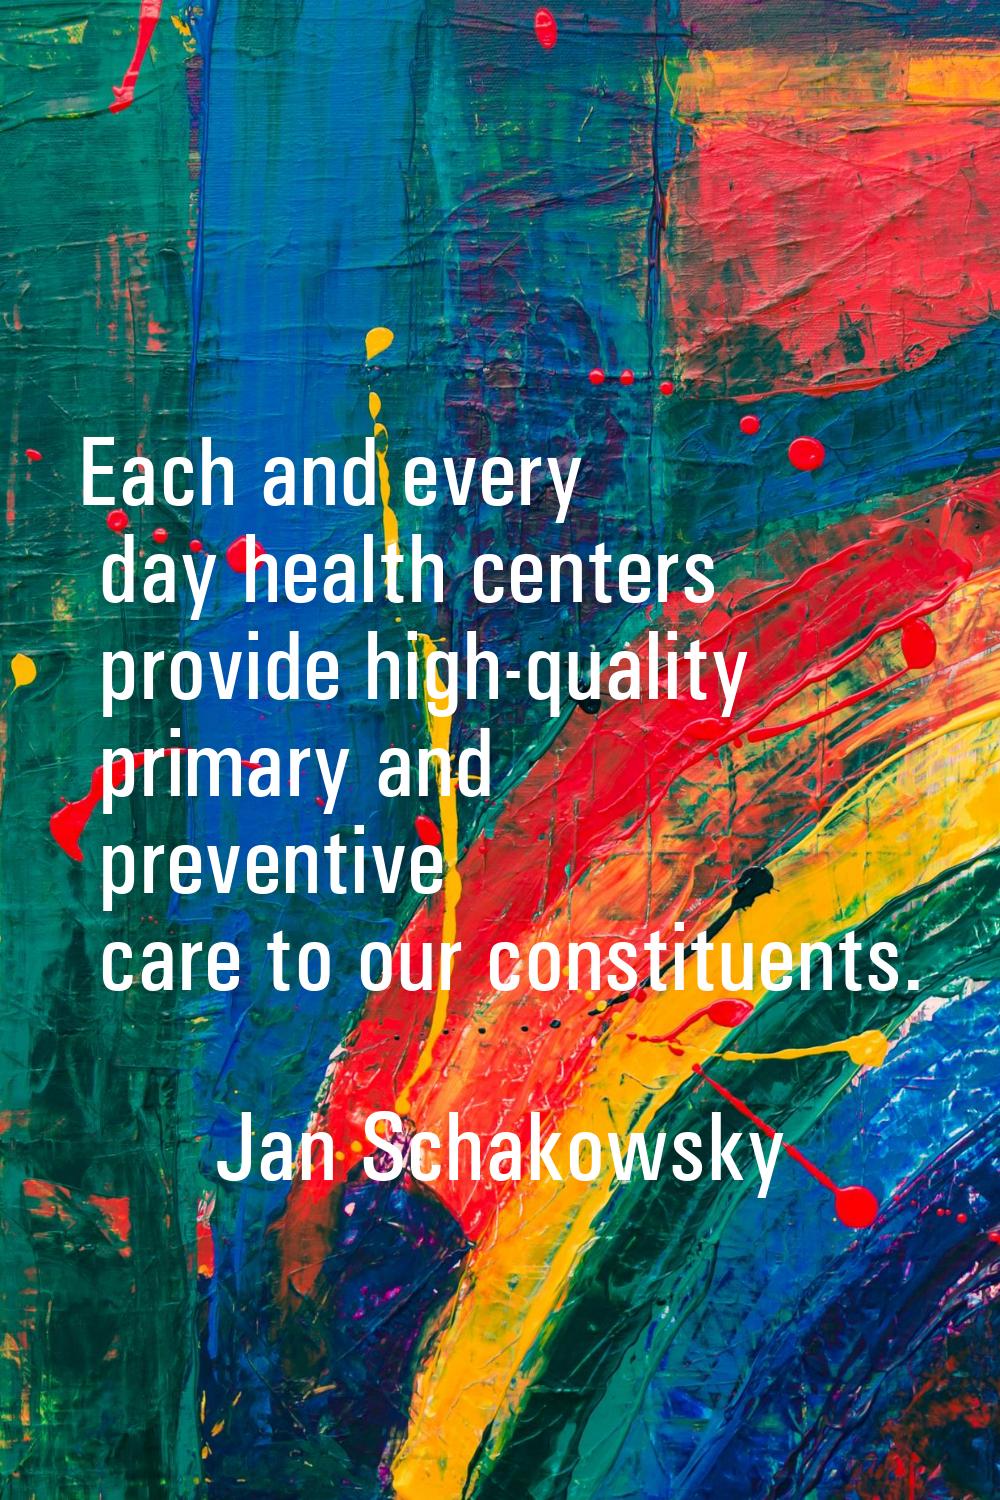 Each and every day health centers provide high-quality primary and preventive care to our constitue